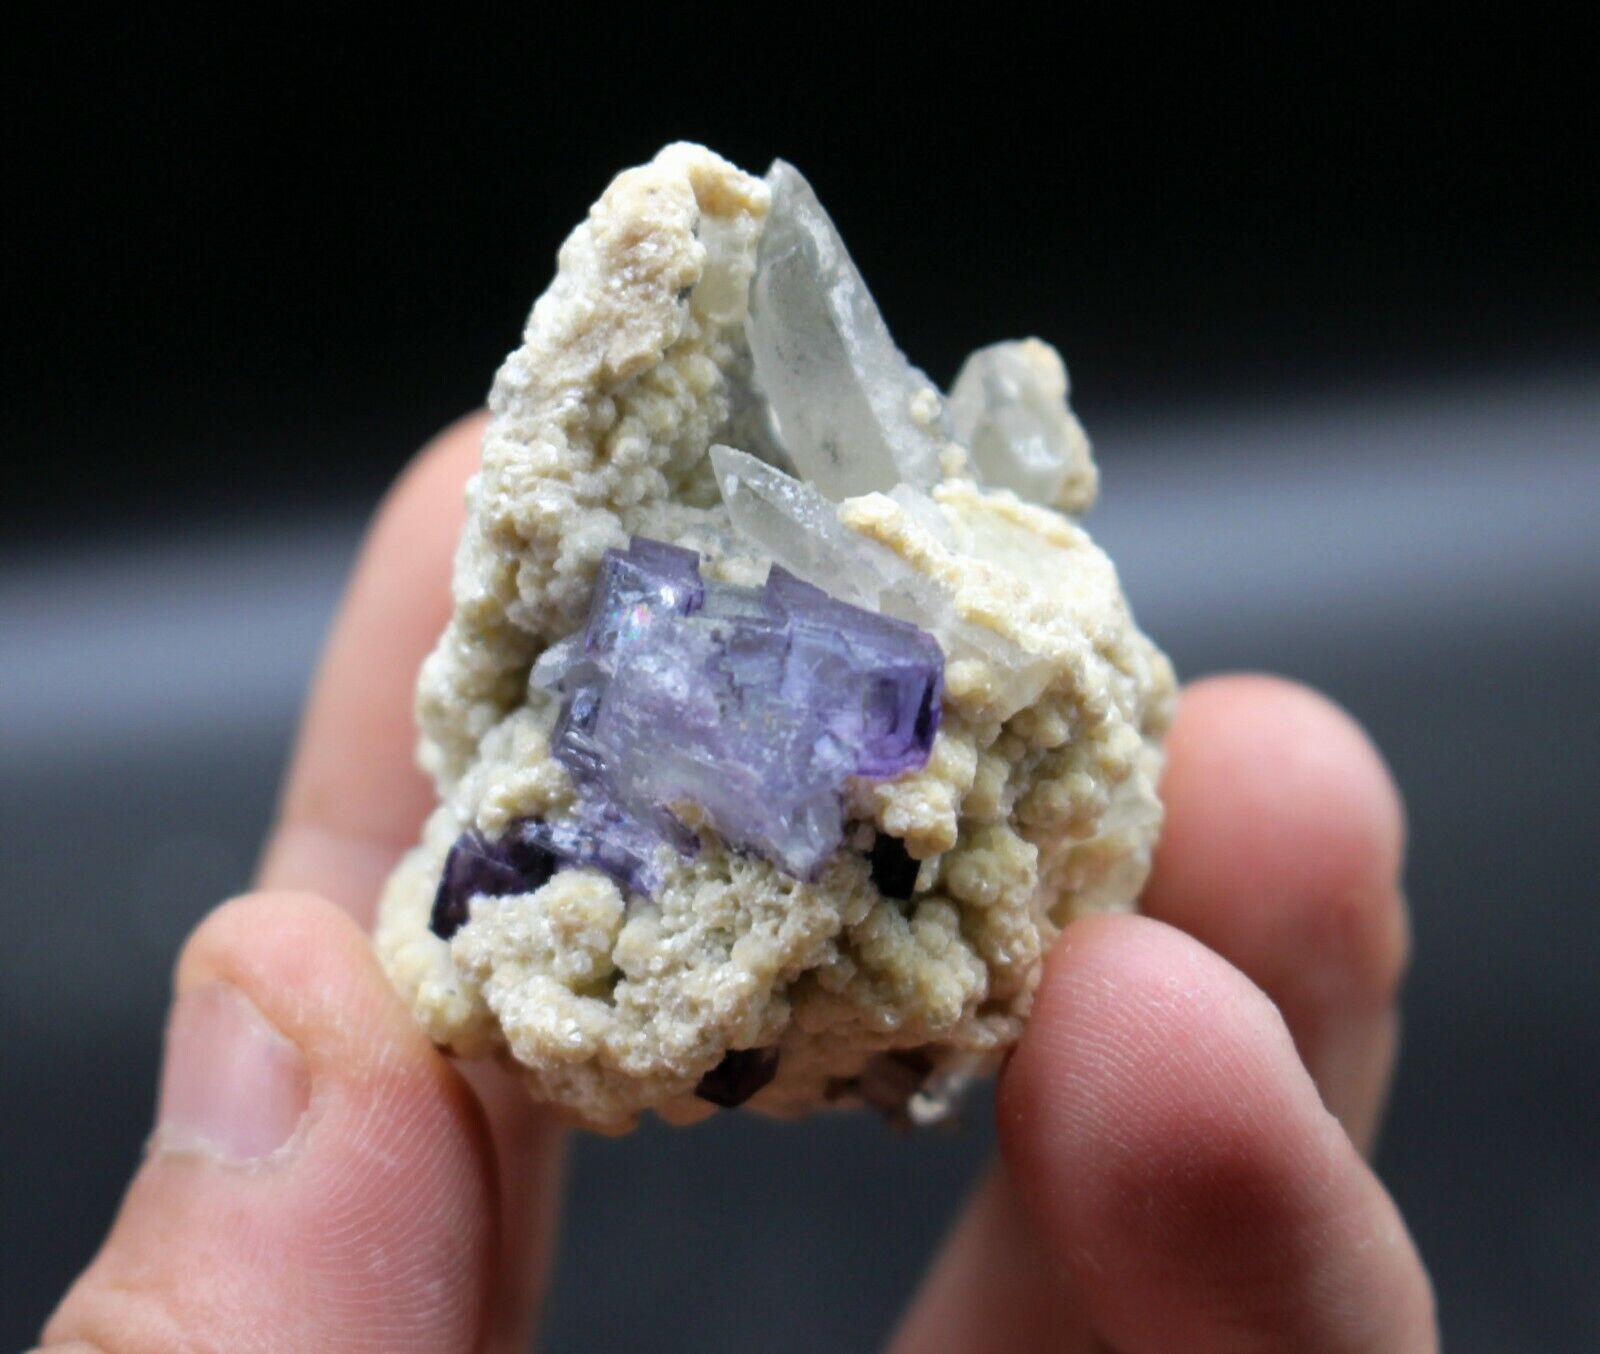 76g Newly discovered natural rare crystal + purple fluorite specimen/China